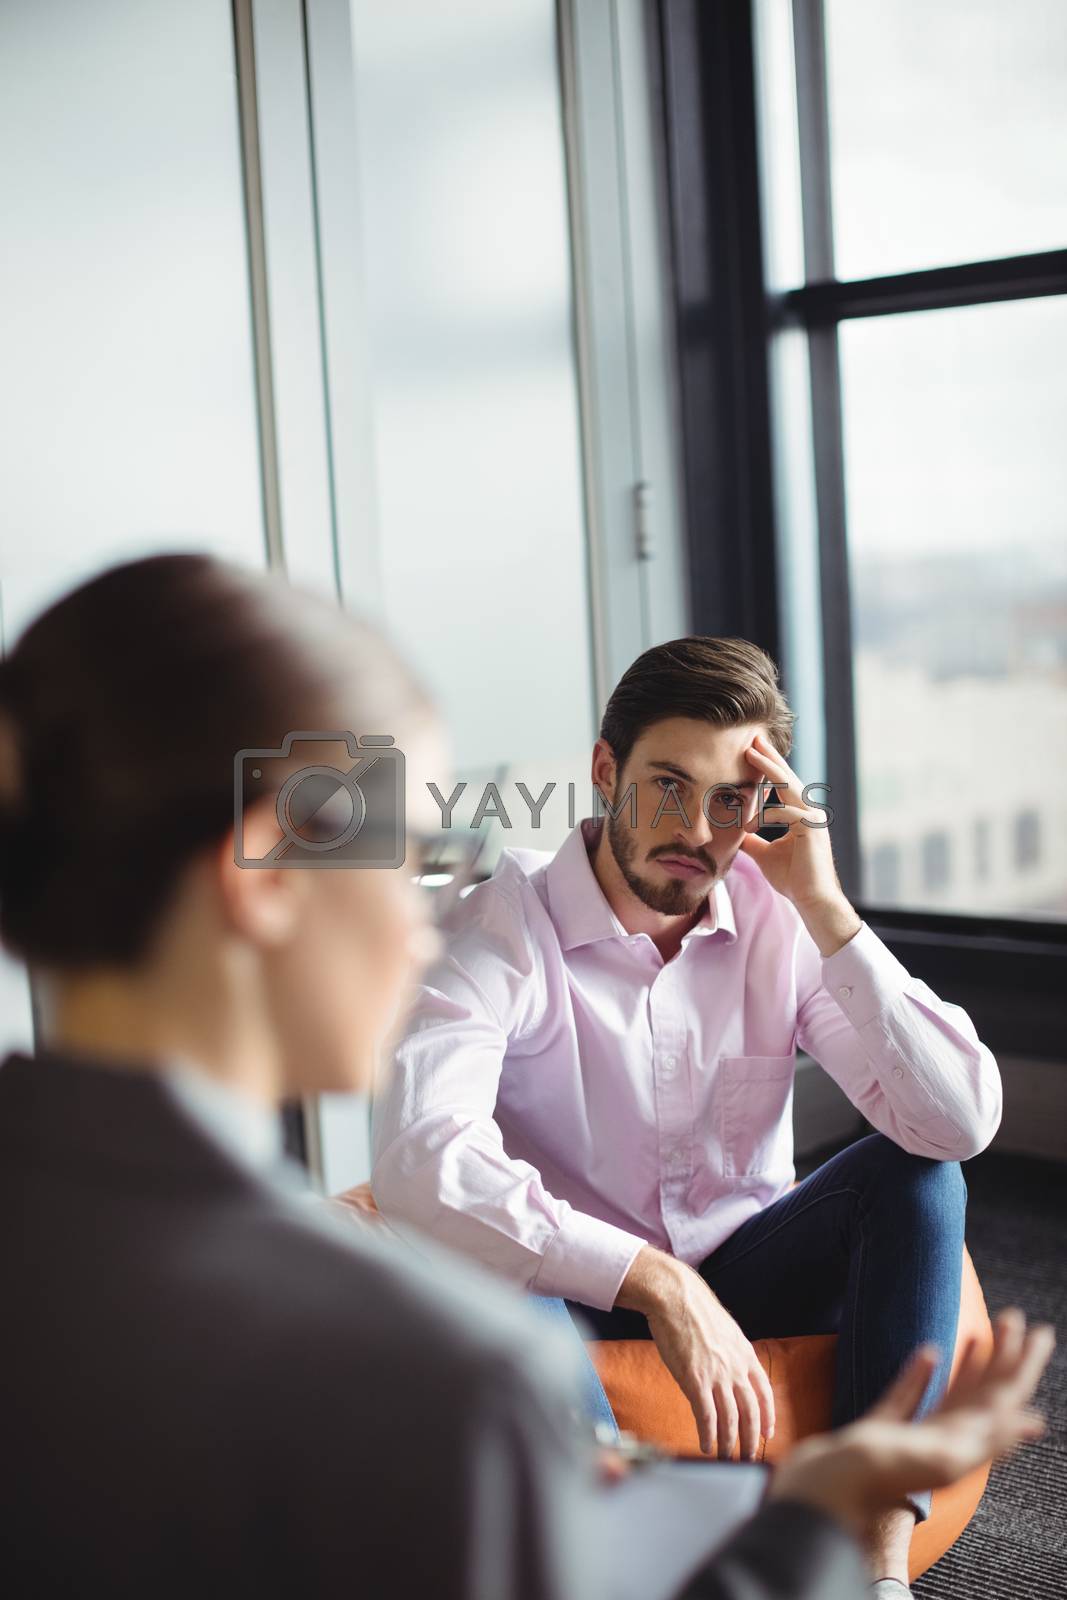 Royalty free image of Unhappy man consulting counselor by Wavebreakmedia